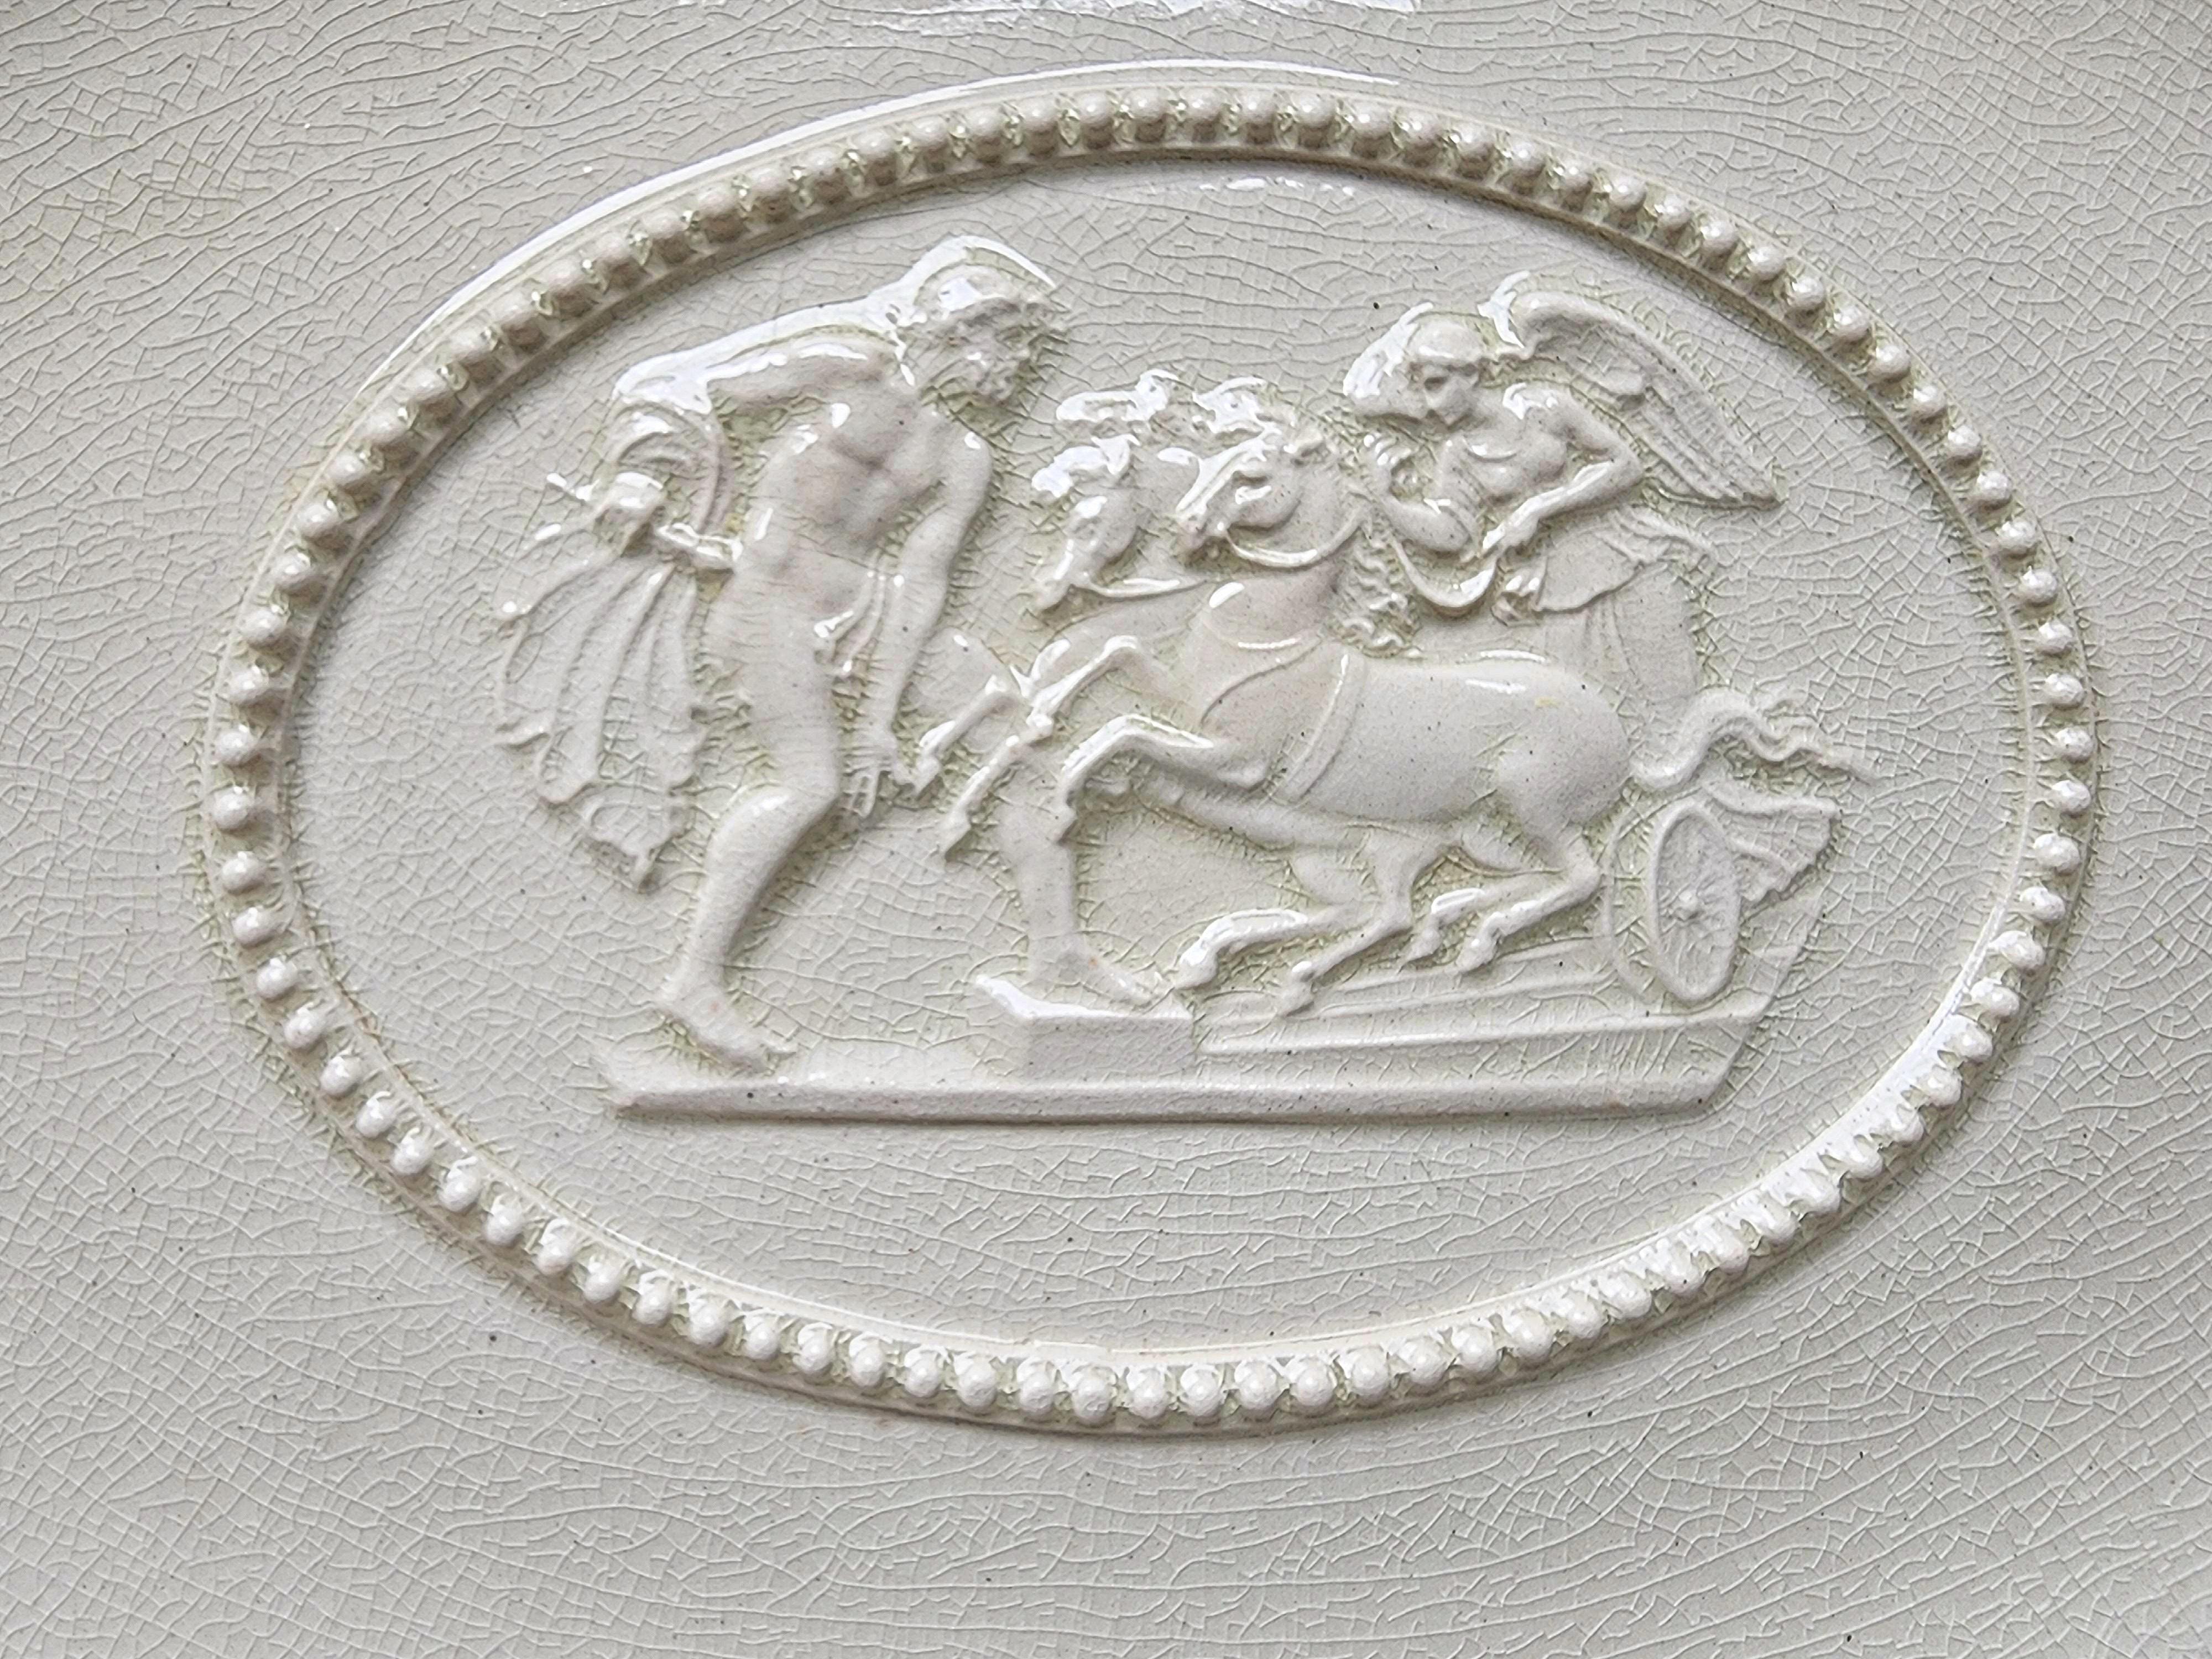 Rare form antique, early 19th c. English creamware dish by Wedgwood. With a pierced and reticulated border and a central relief reserve showing a classical scene of an angel driving a chariot perhaps 